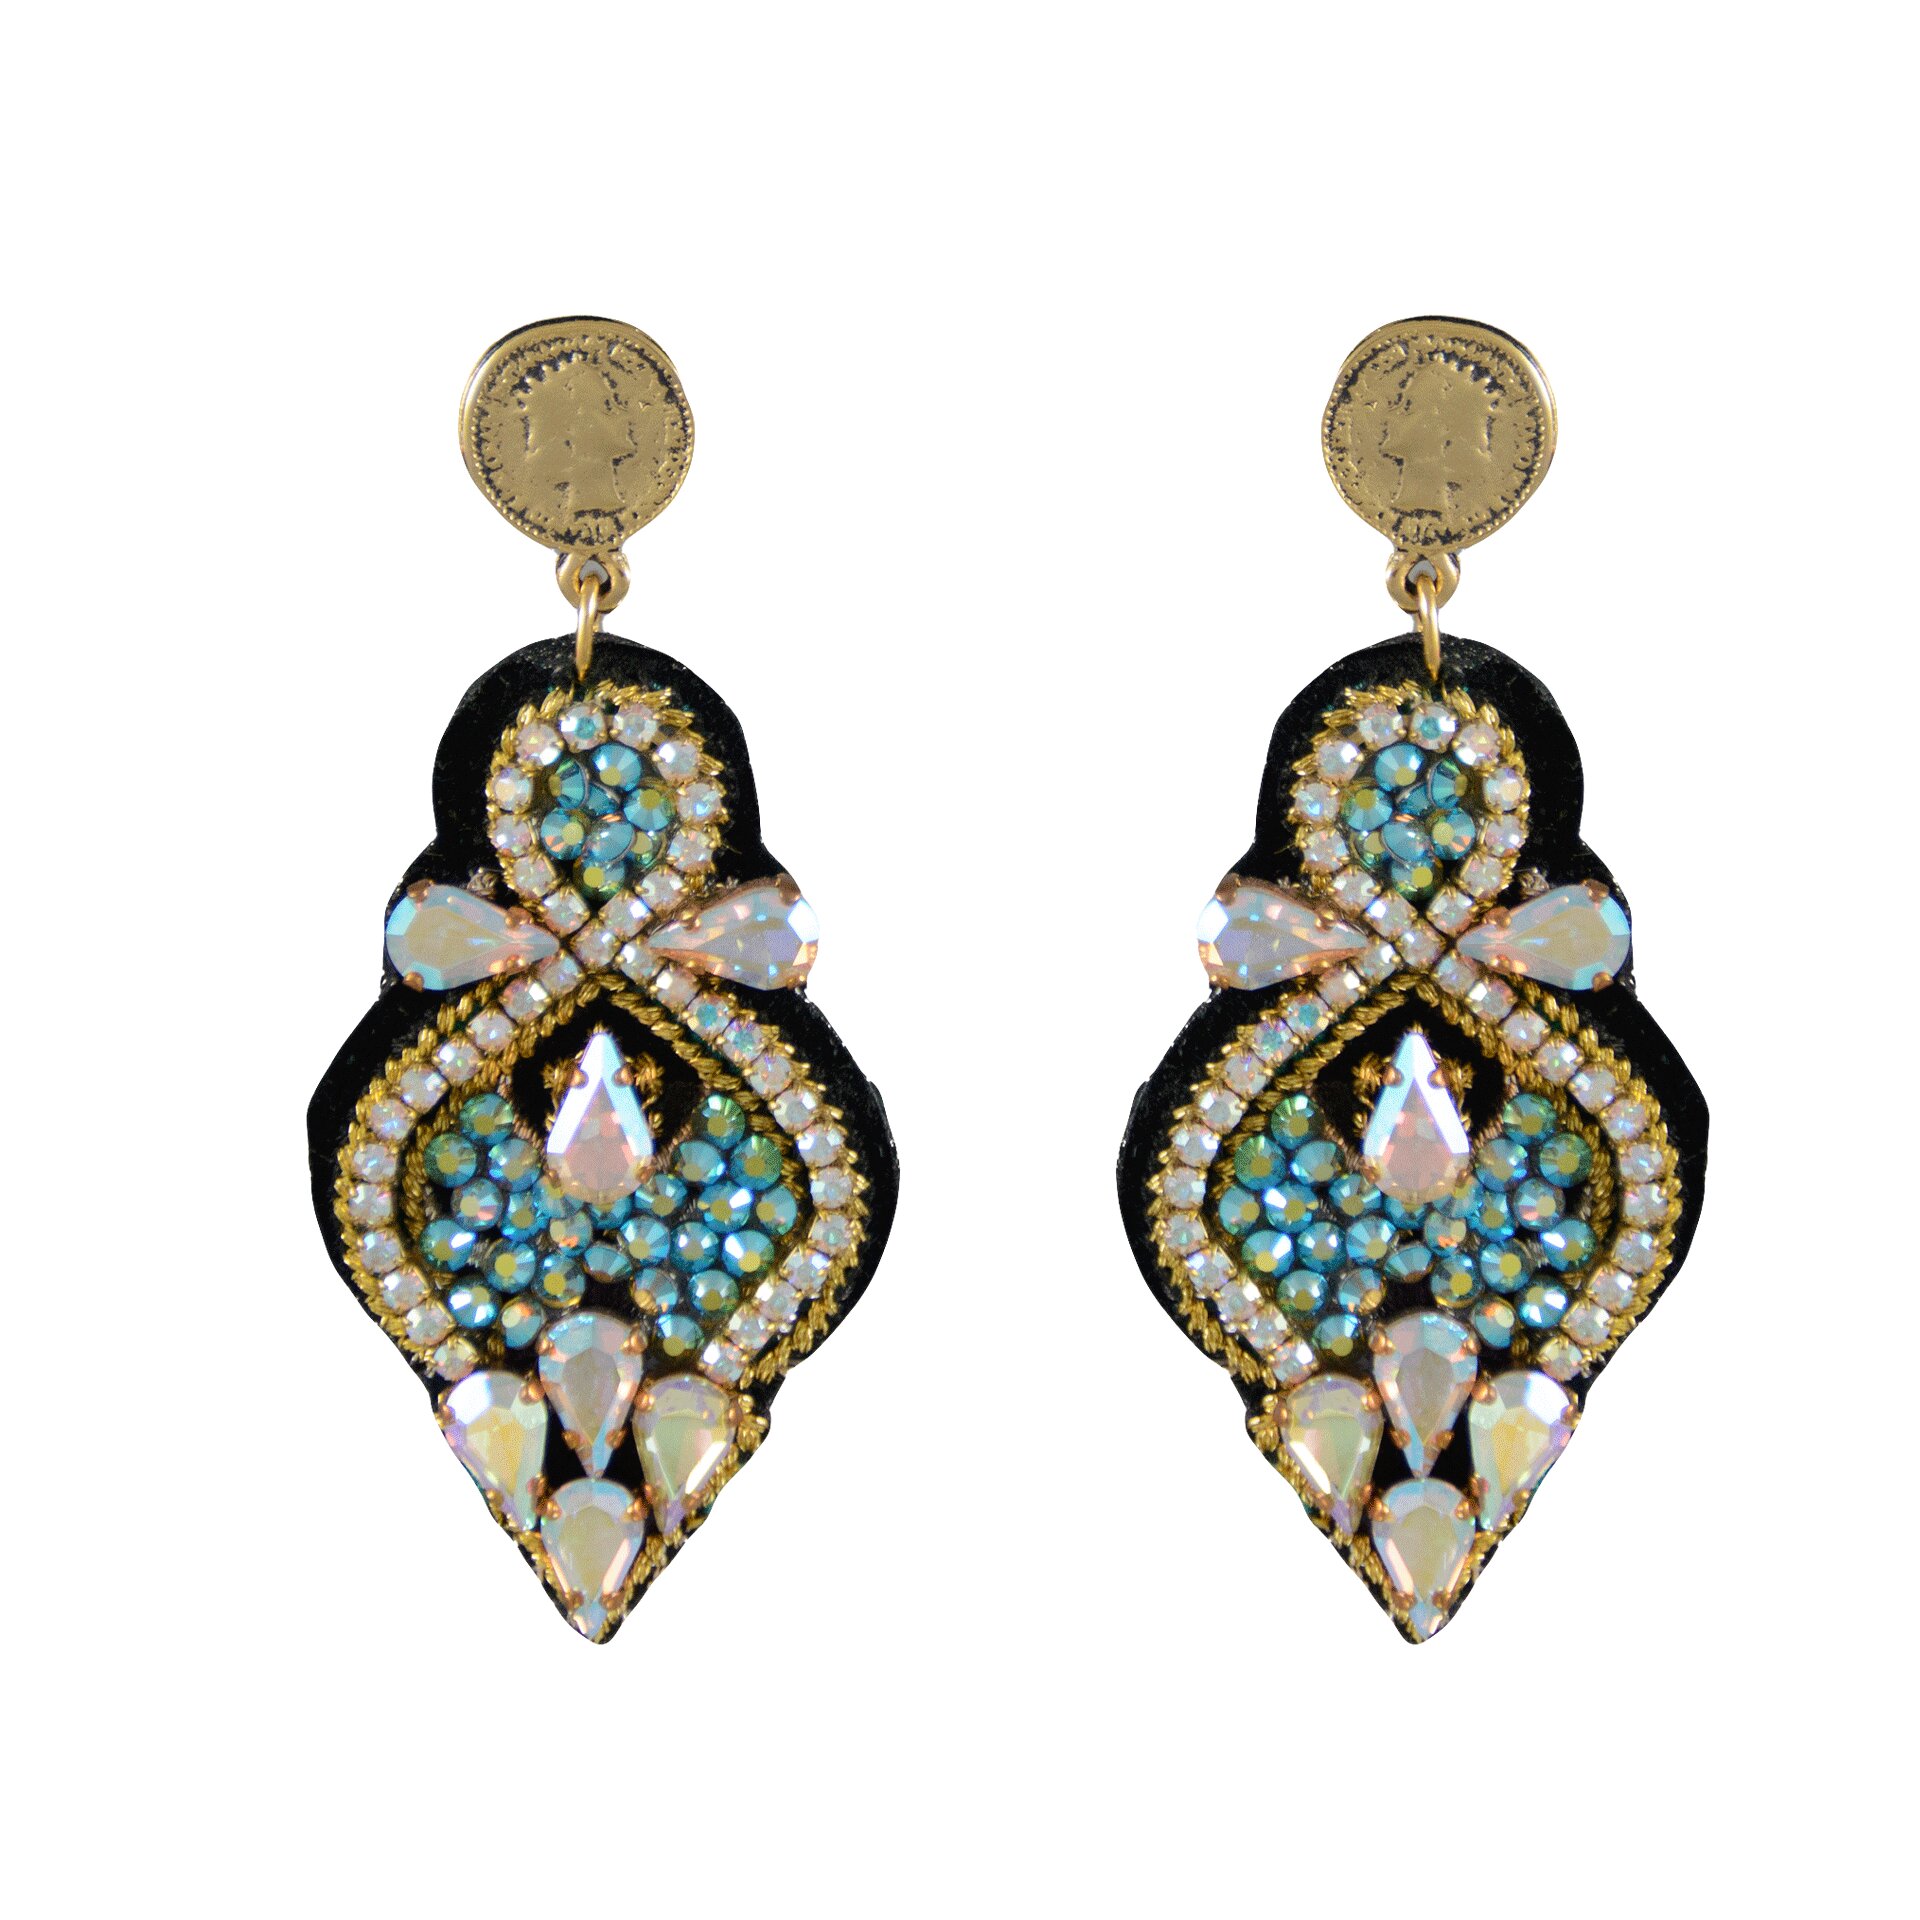 LINDA'S DREAM light blue earrings with gold elements